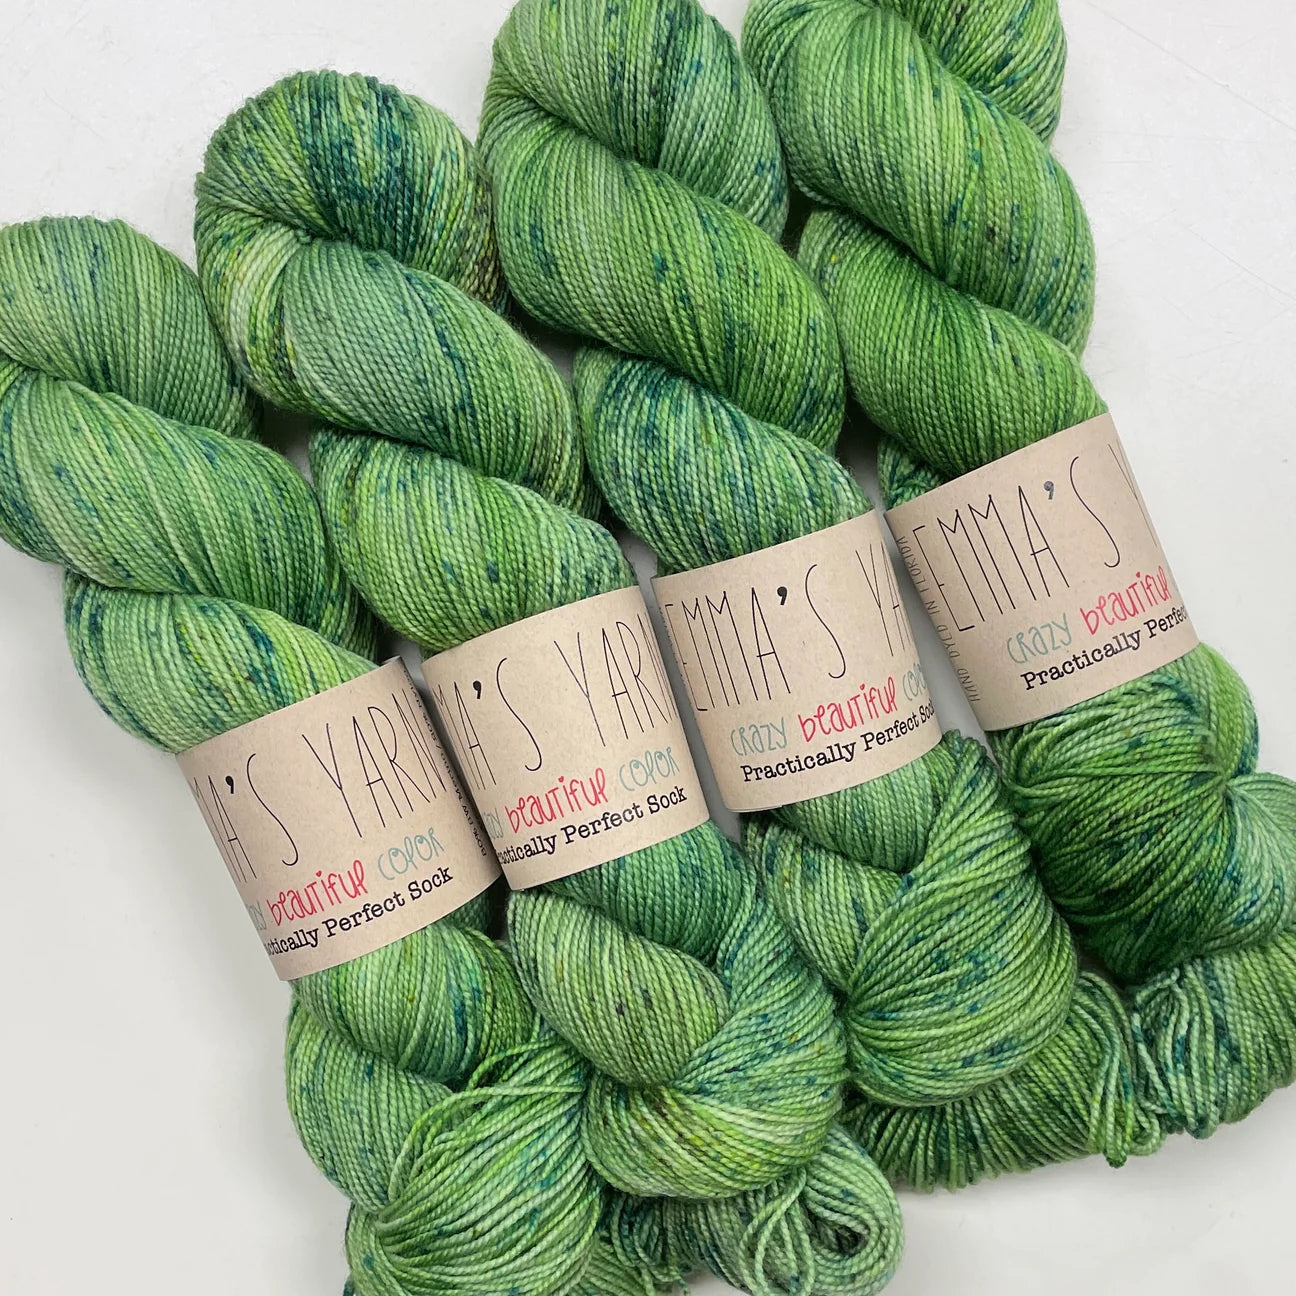 Emmas yarn; Practically perfect Sock; It's Not Easy Being Green